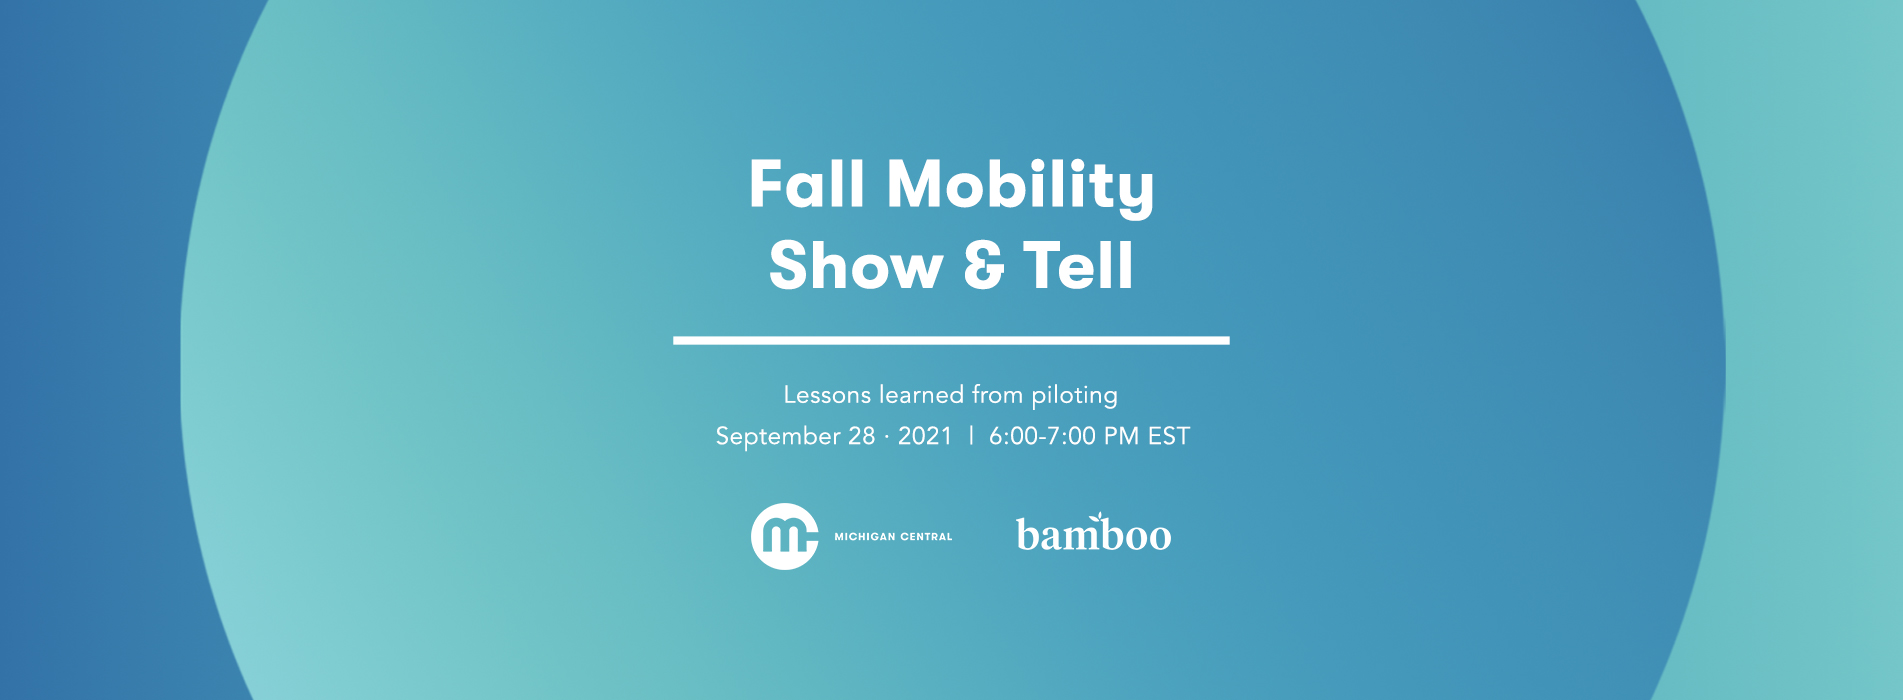 fall mobility show and tell - lessons learned from piloting